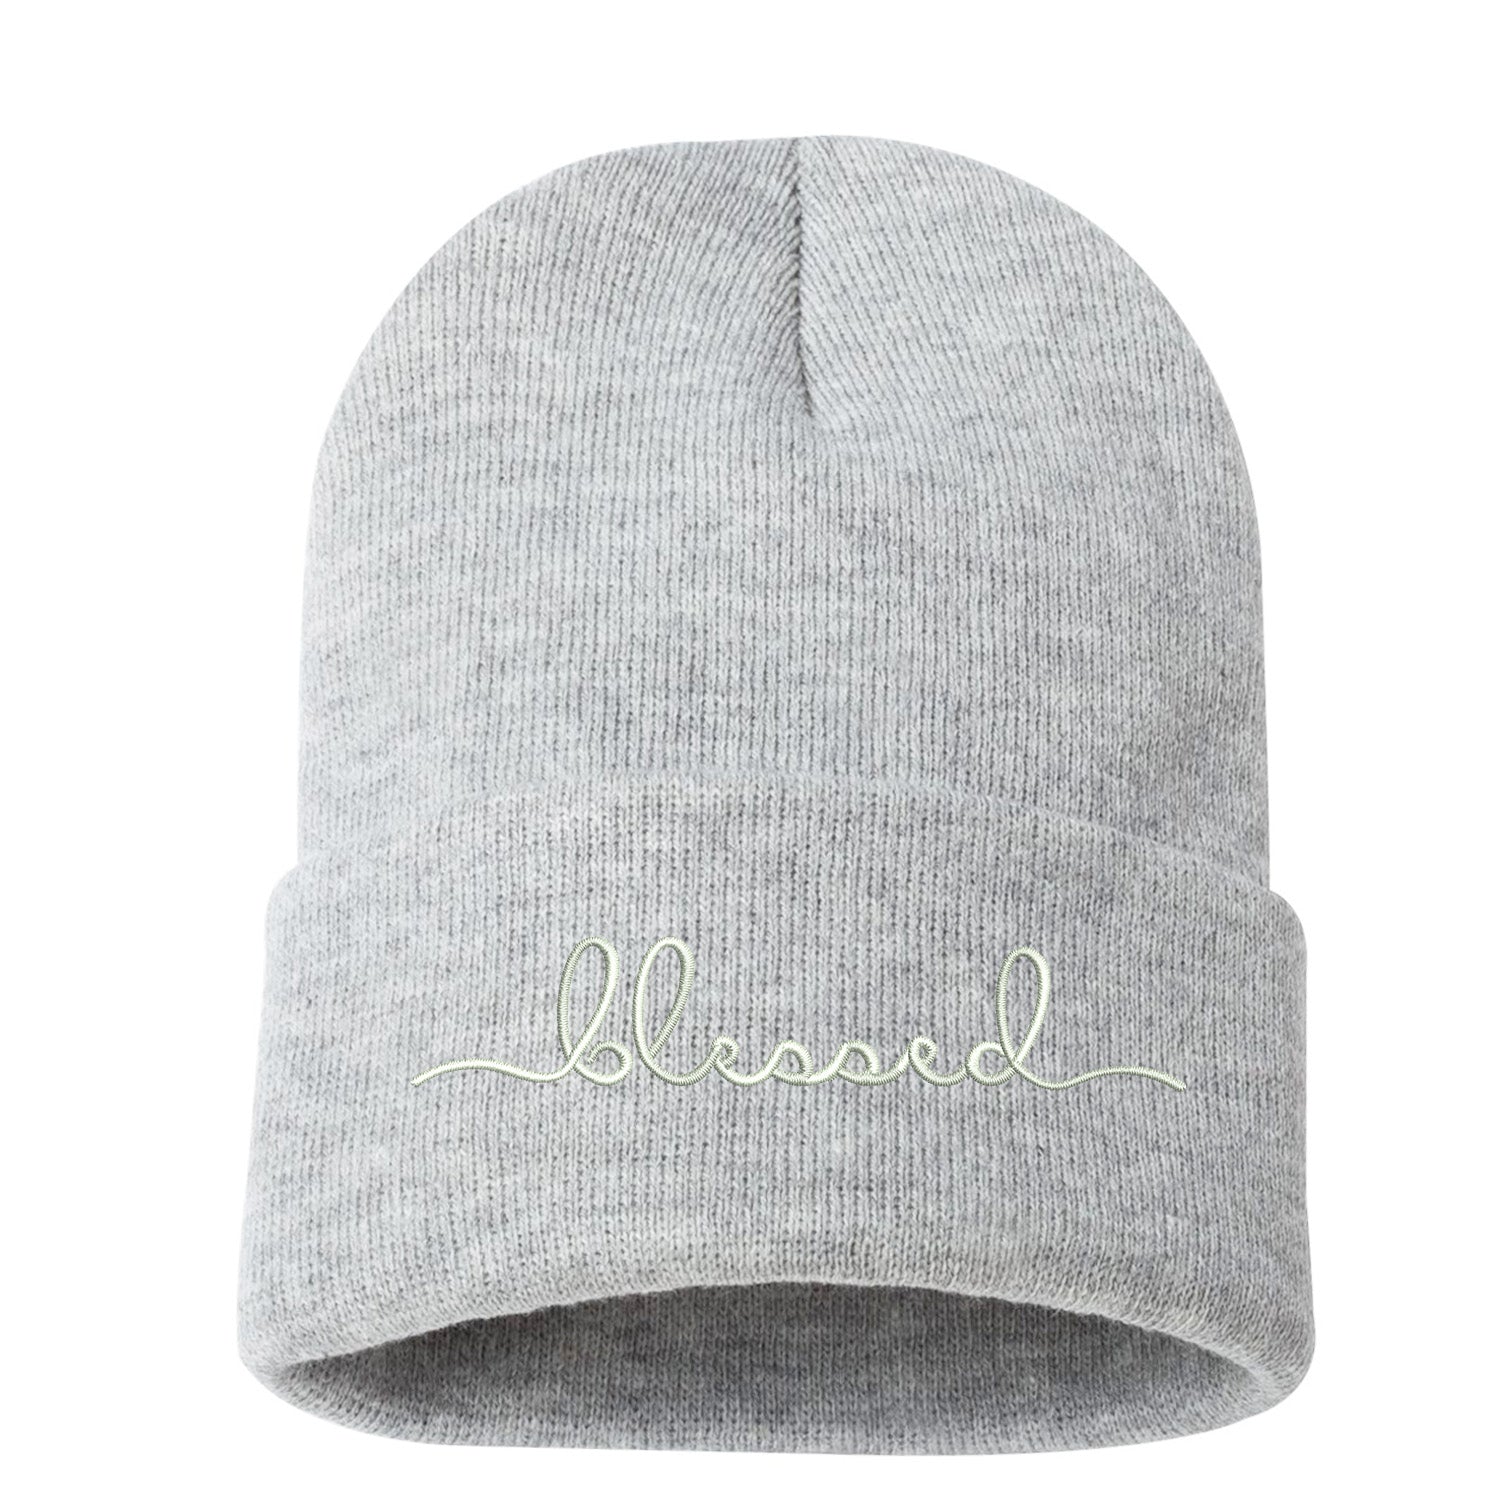 Unisex Blessed Cuffed Beanie Hat, Embroidered Beanie Cap, Cuffed Beanie, Blessed Beanie Hat, Custom Embroidery, Blessed, Thanksgiving Hat, Cursive Text, Embroidered Text, Heather Grey Beanie Cap Hat, DSY Lifestyle Beanie, Made in LA